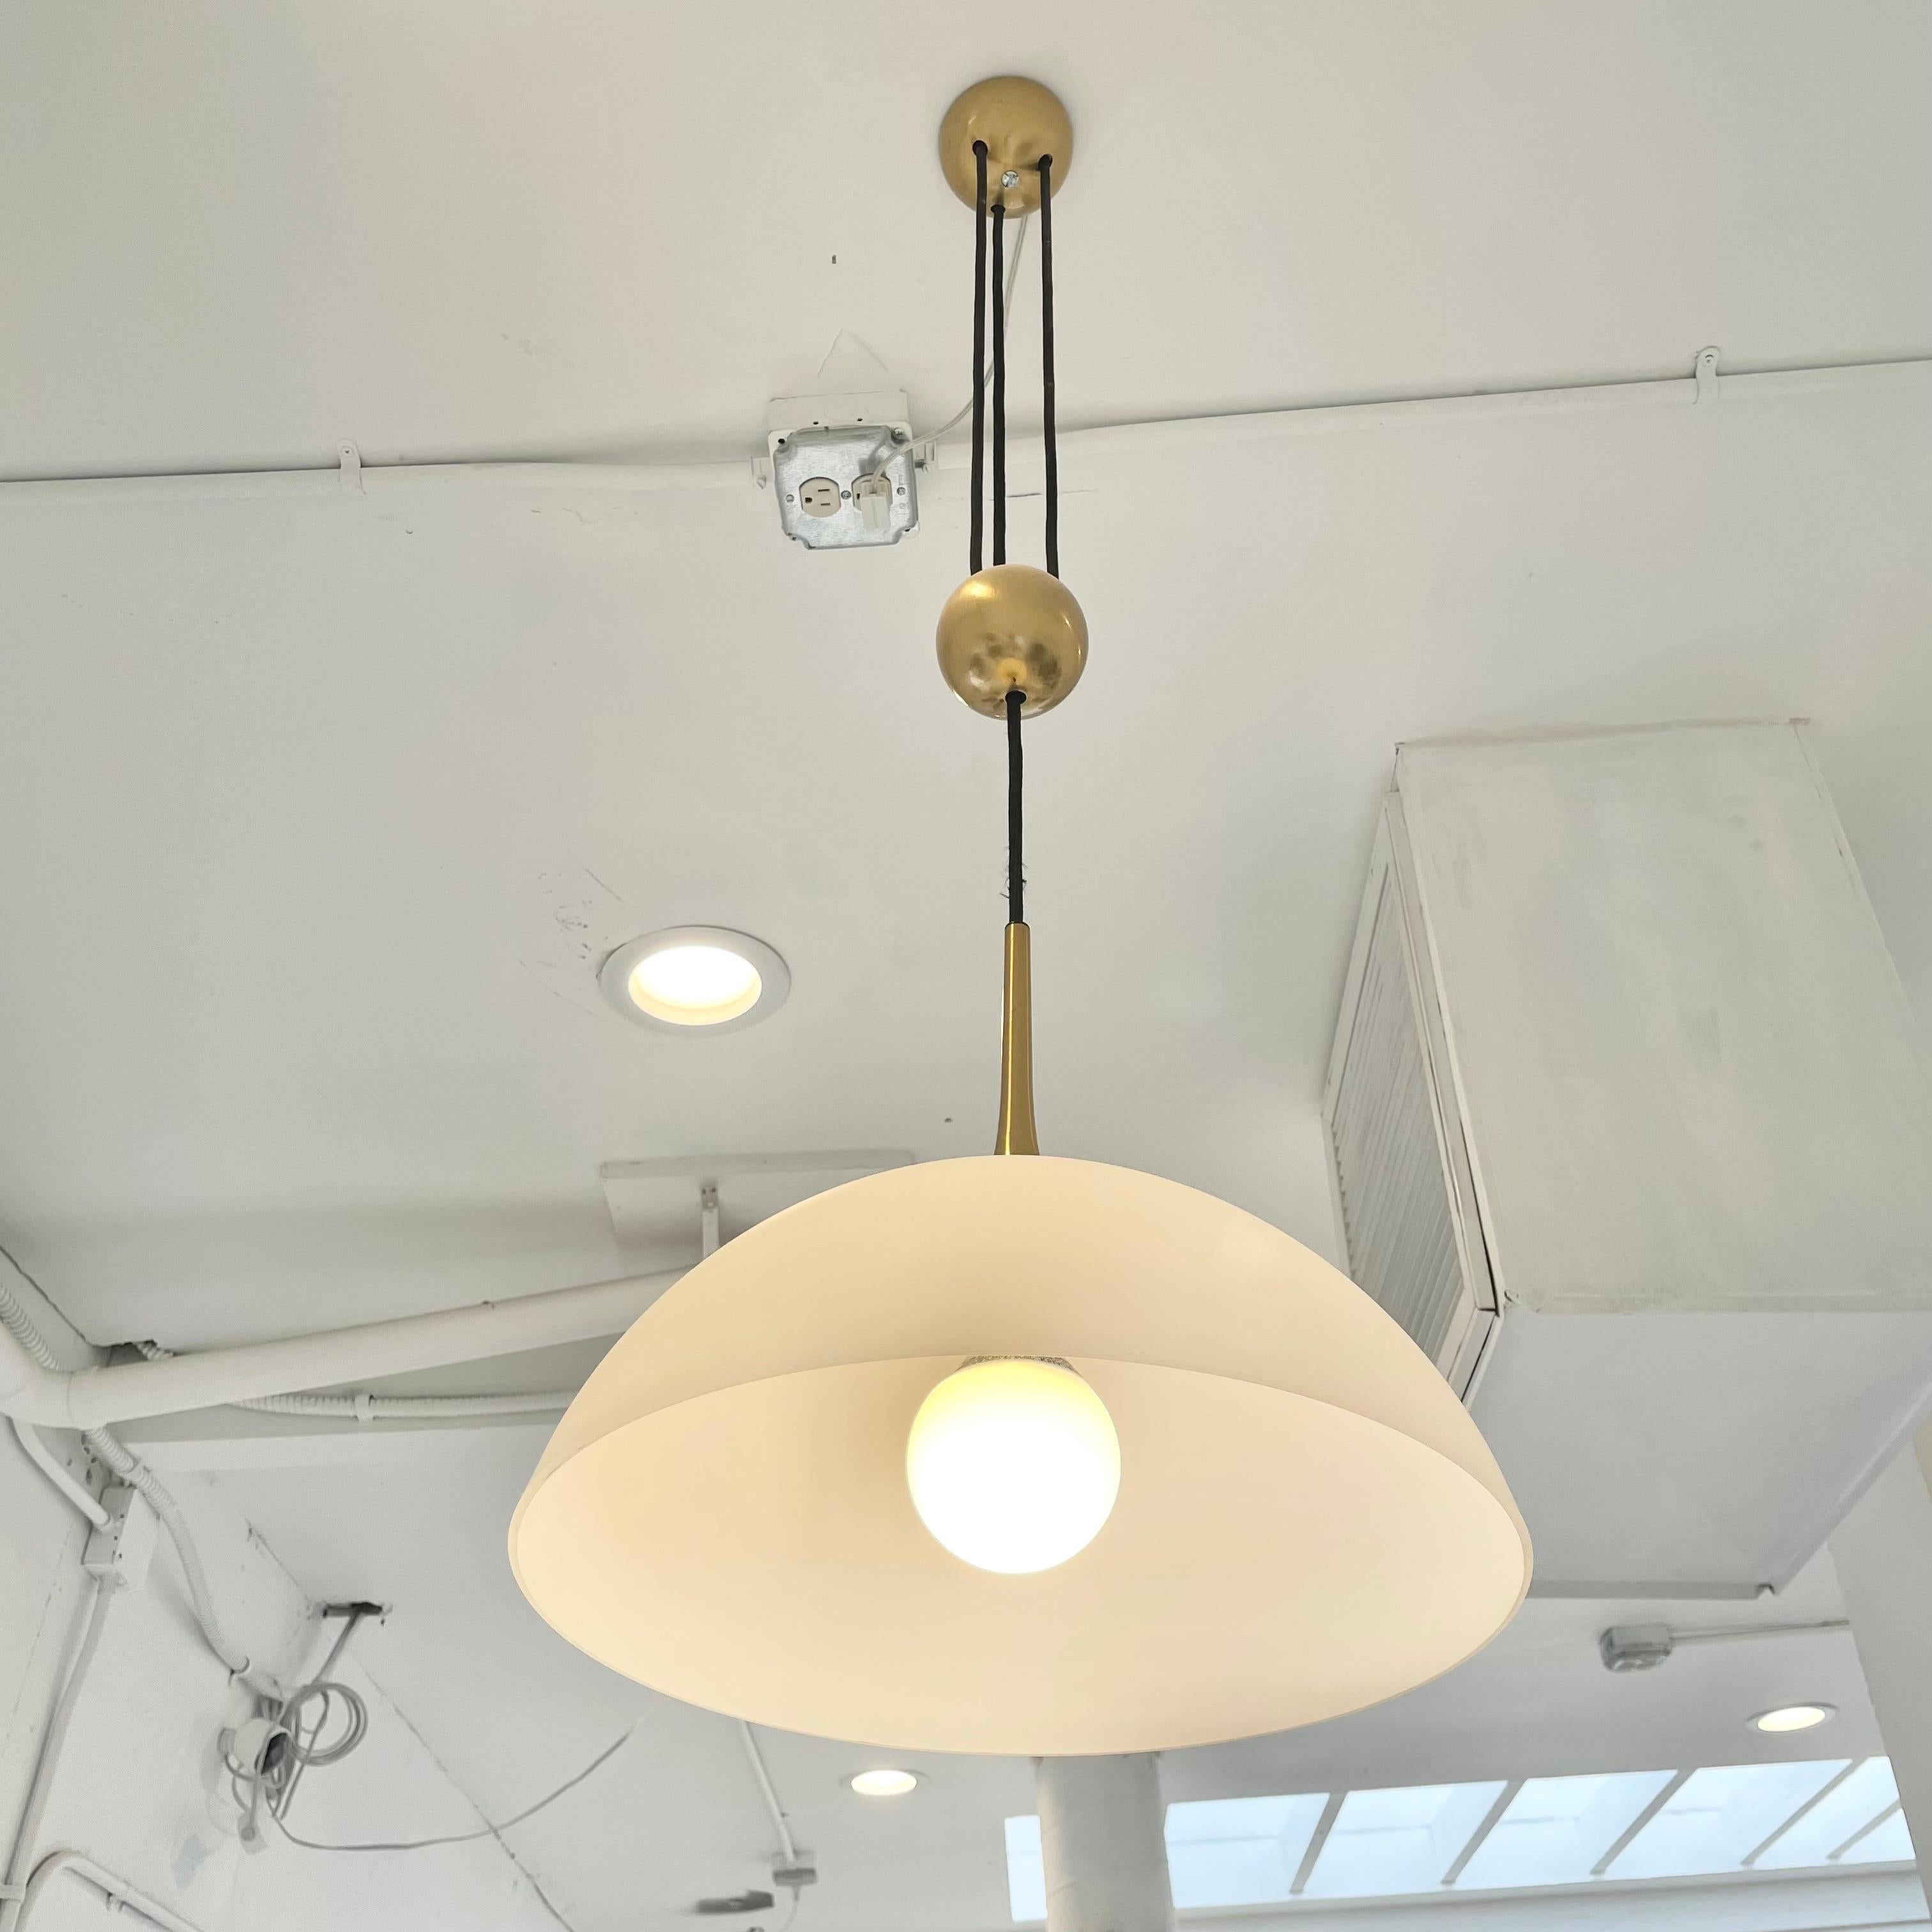 Florian Schulz Counter Balance Pendant with Frosted Glass Shade, 1970s Germany For Sale 3